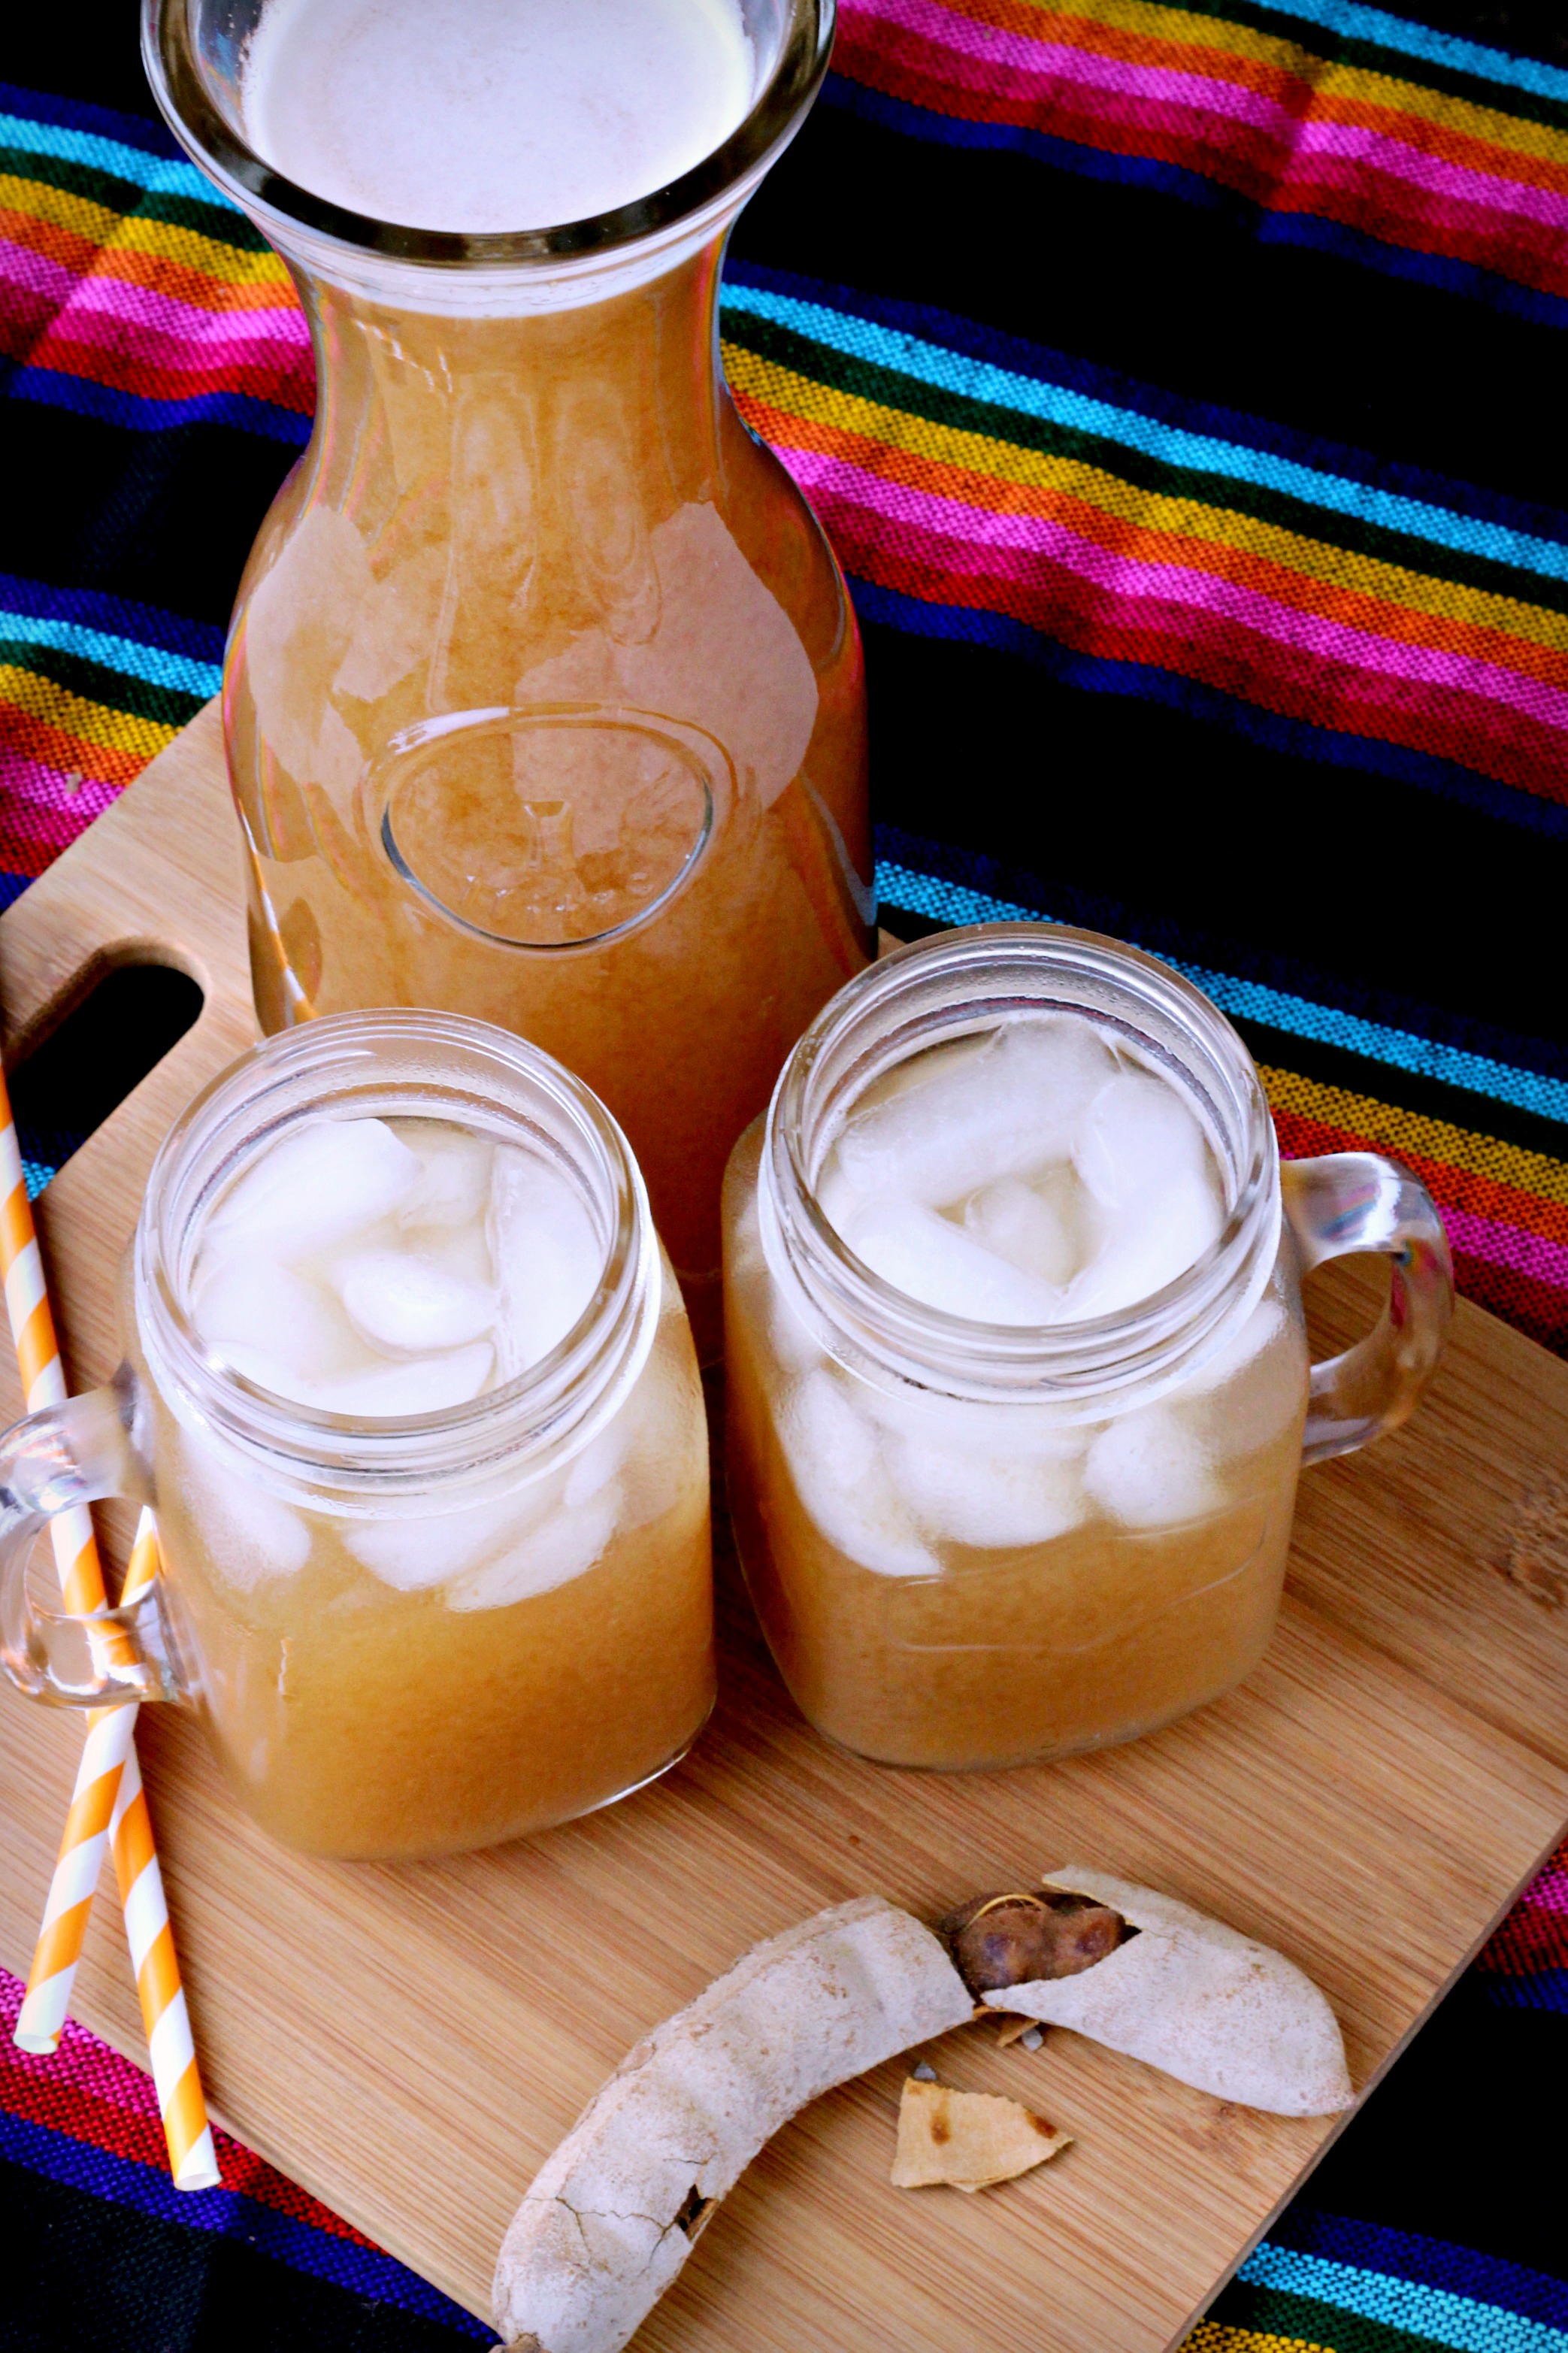 Learn how to make authentic Mexican Agua Fresca de Tamarindo, aka Tamarindo Drink. Made with tamarind pods, this soda alternative is a refreshing sweet and sour 3-ingredient drink full of vitamins and minerals.